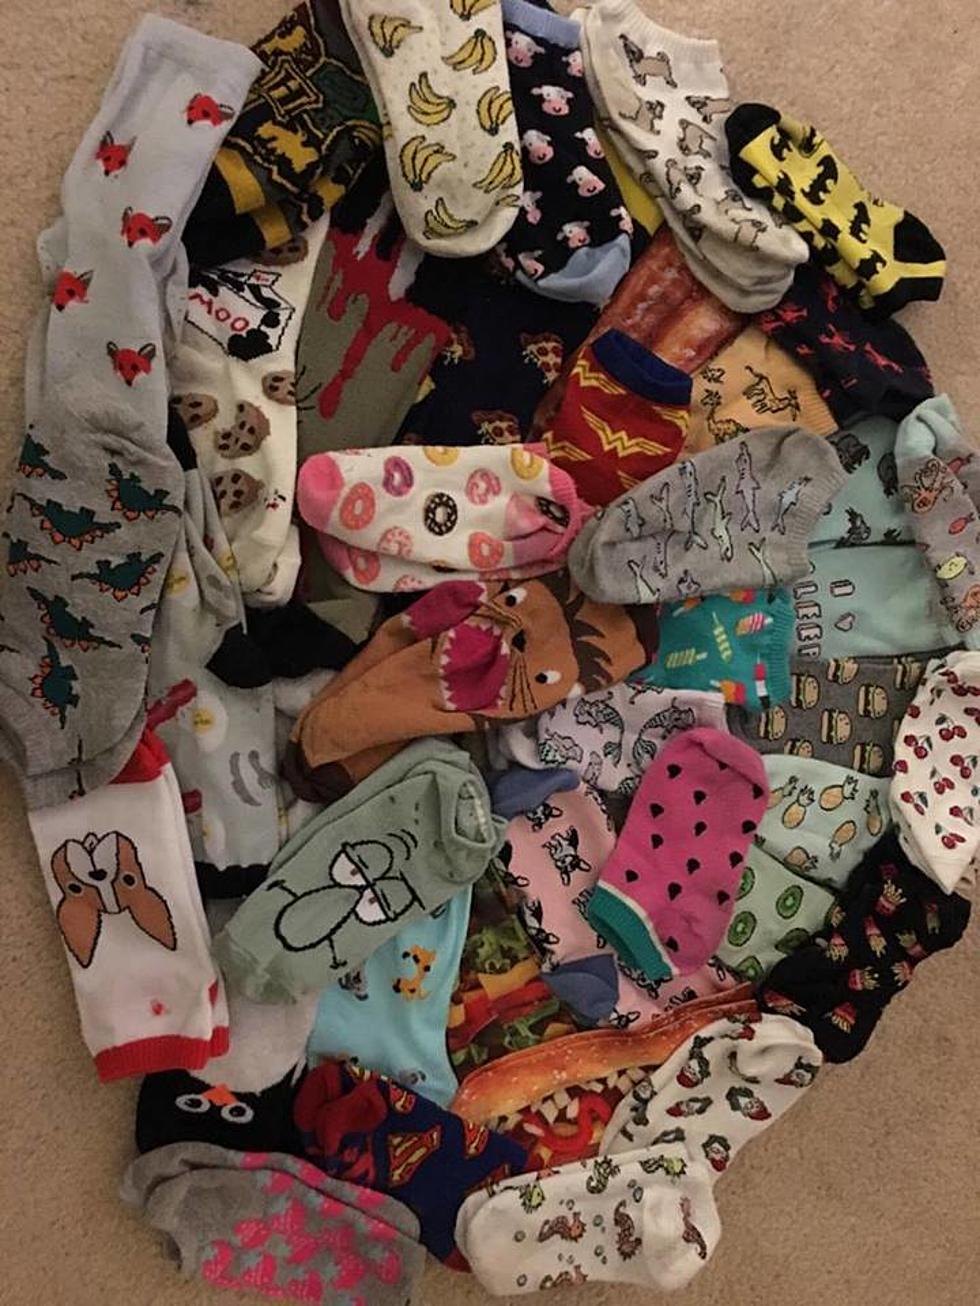 Courtlin Has a Large Collection of Weird Socks [PHOTOS]